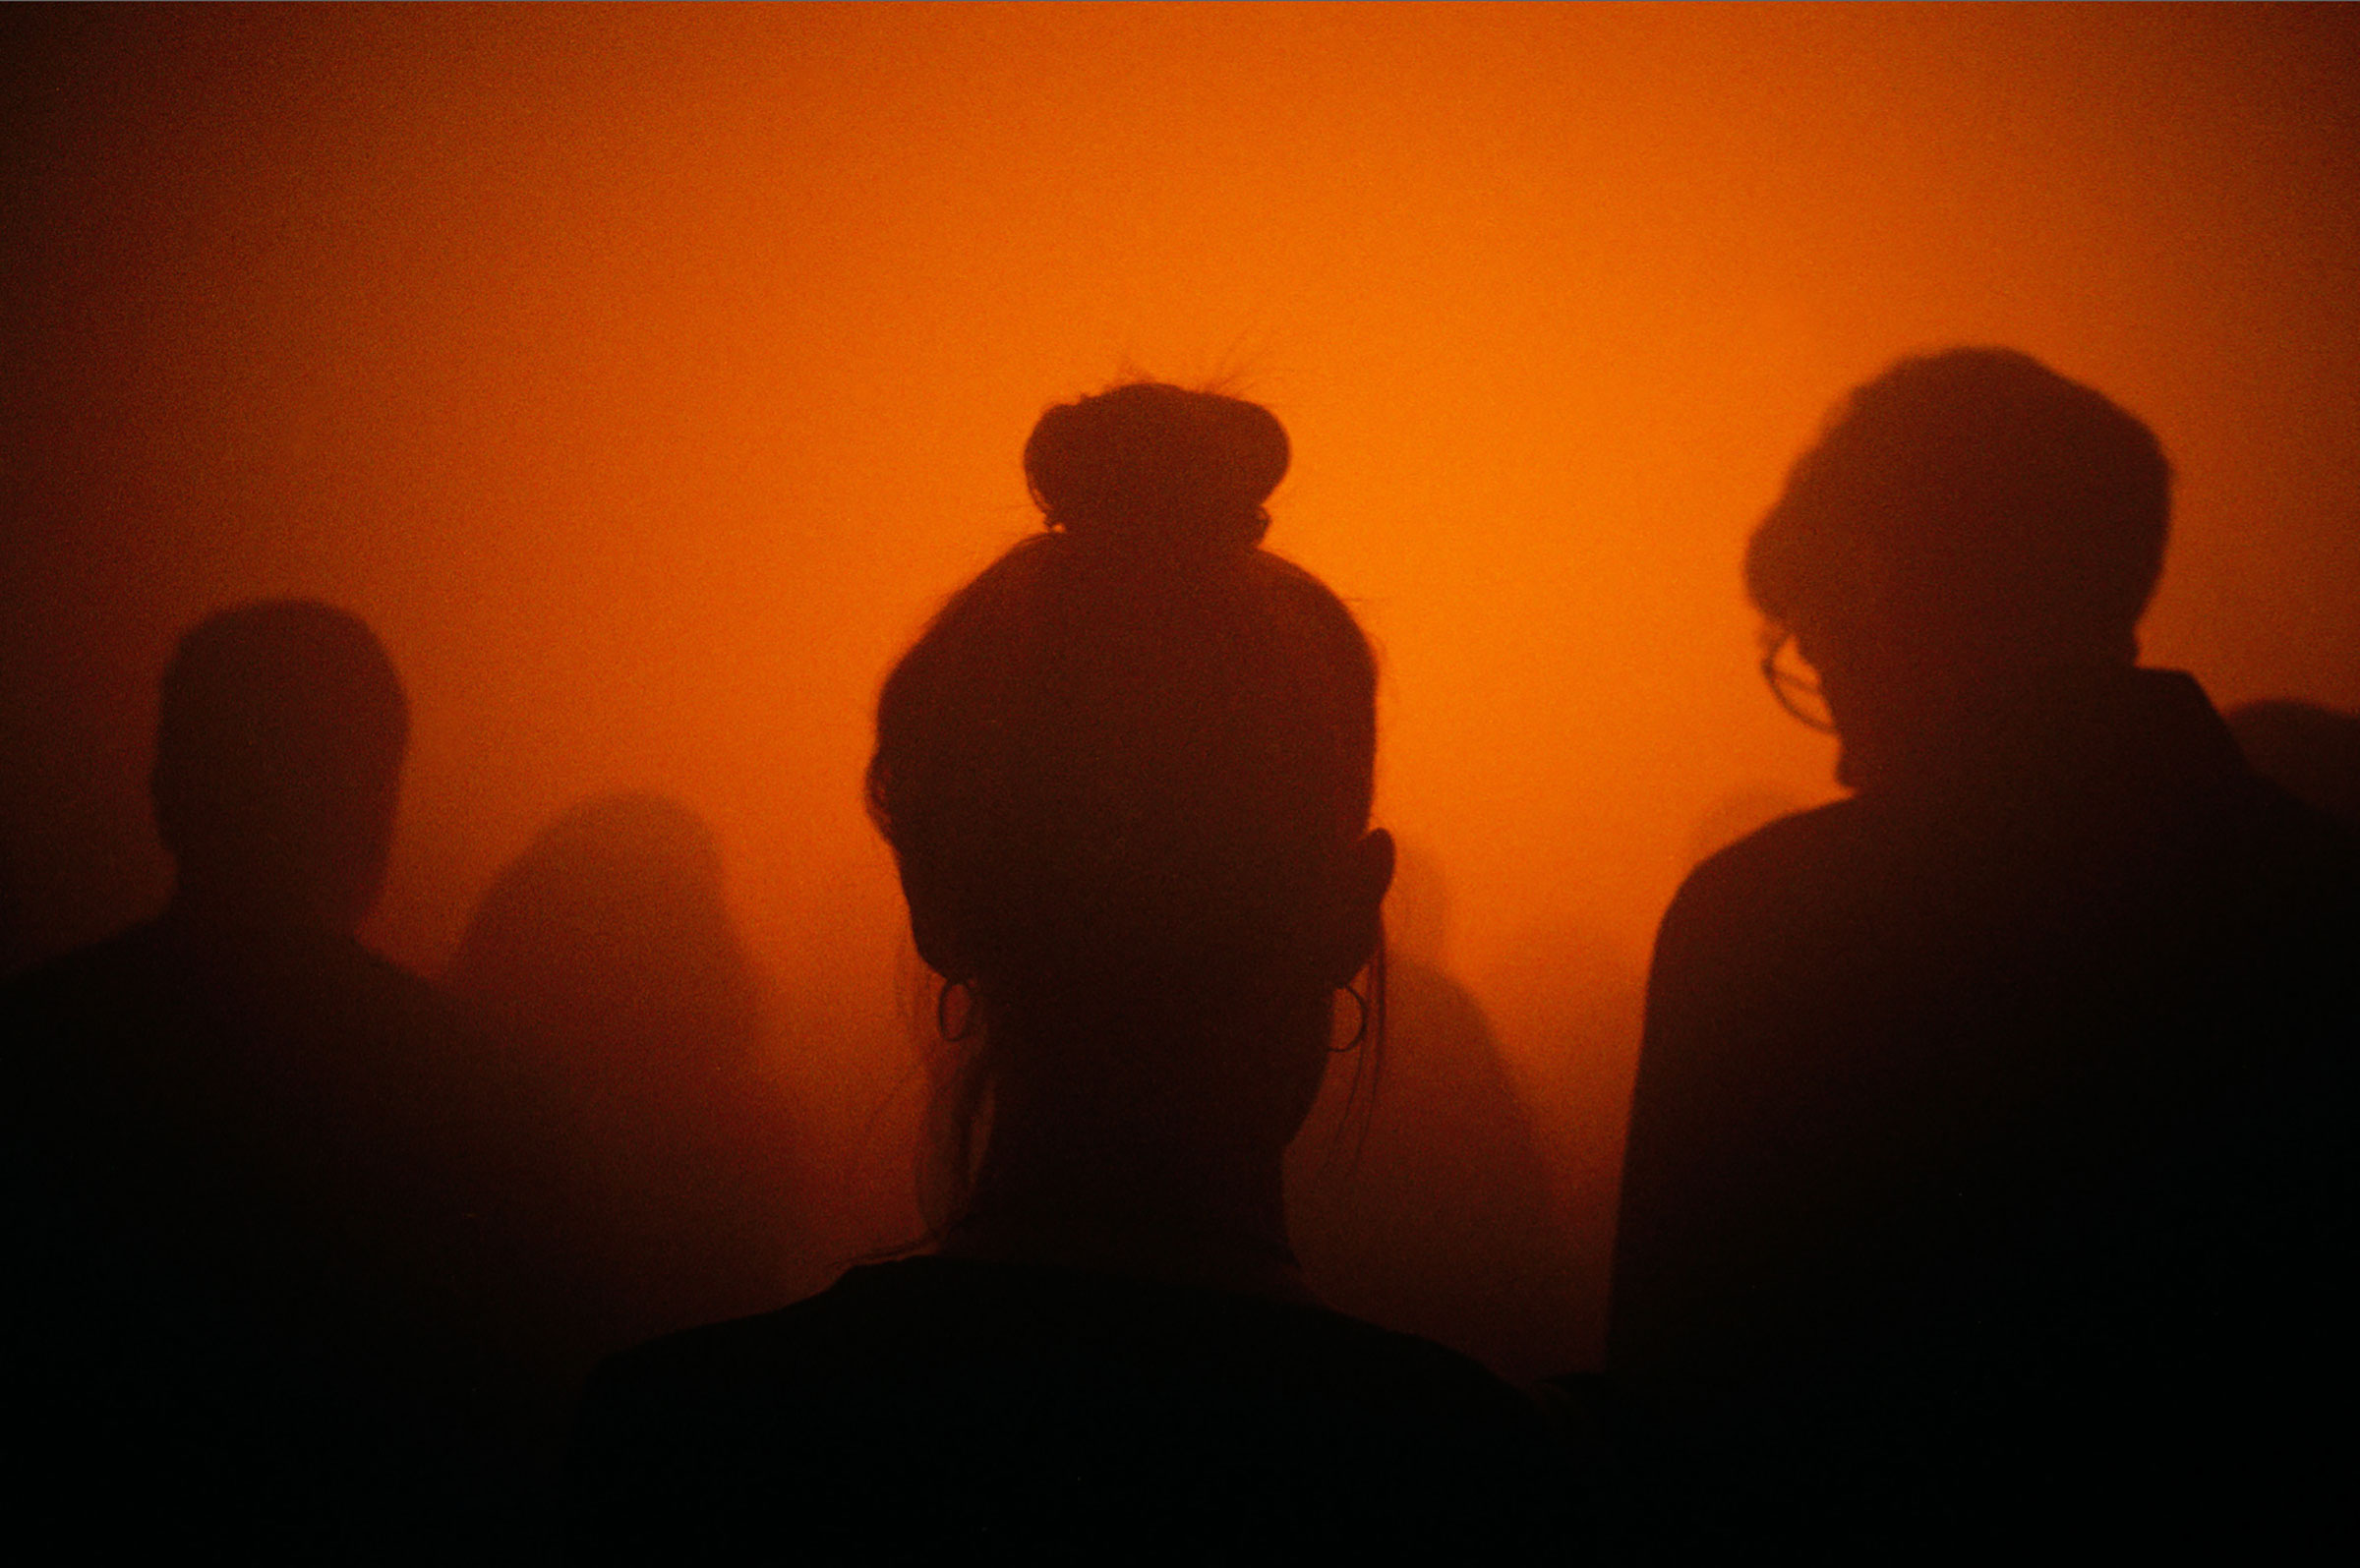 Silhouette of young women in a crowd with smokey orange light